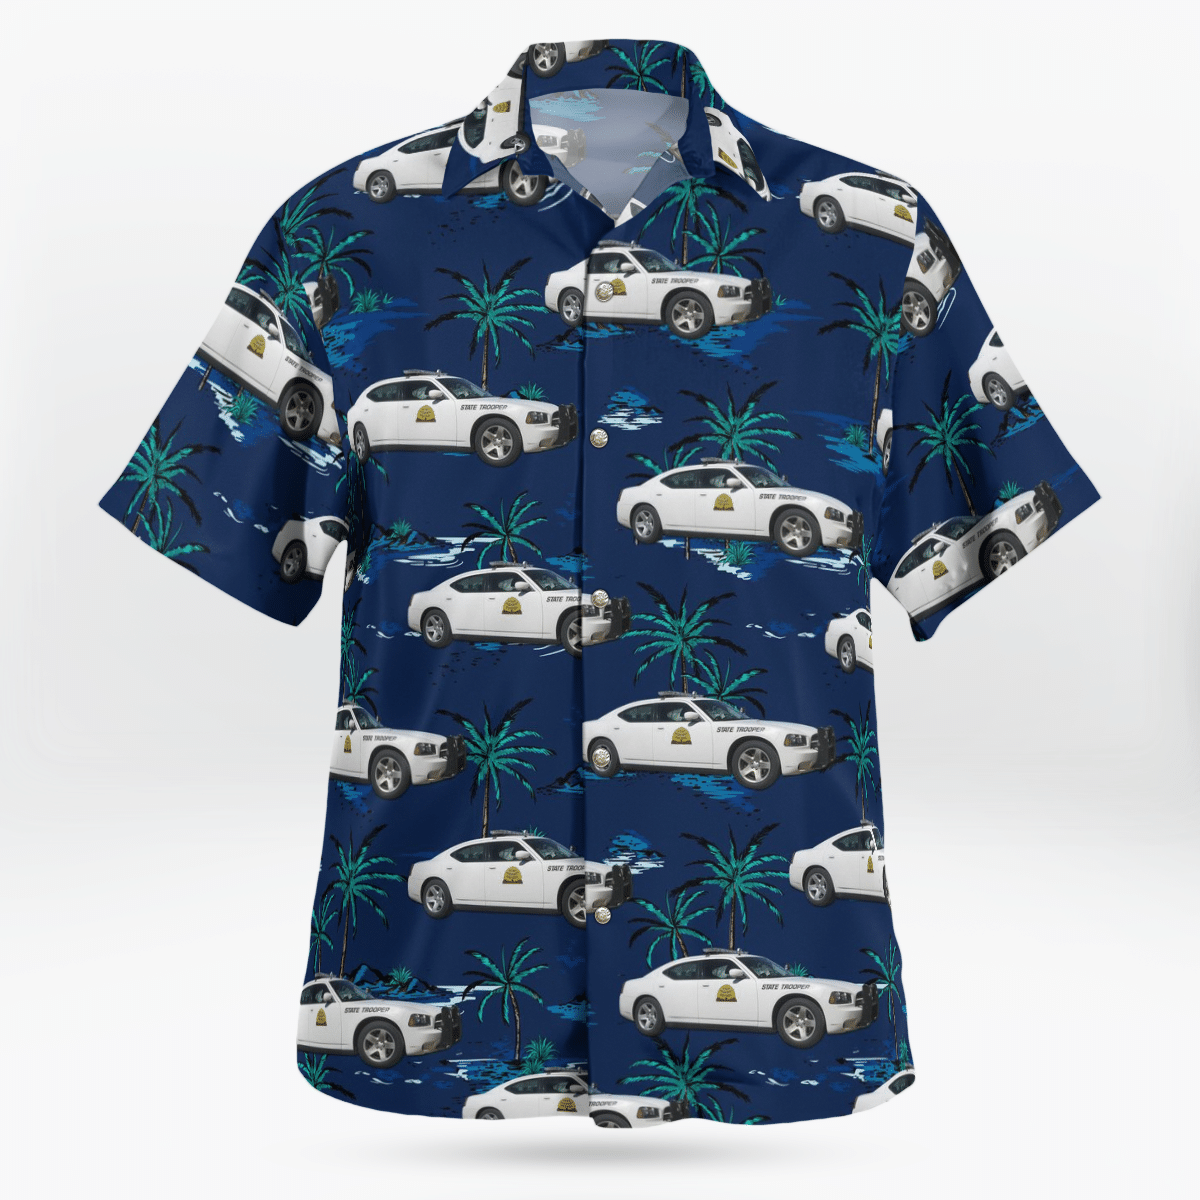 Hawaiian shirts never go out of style 256